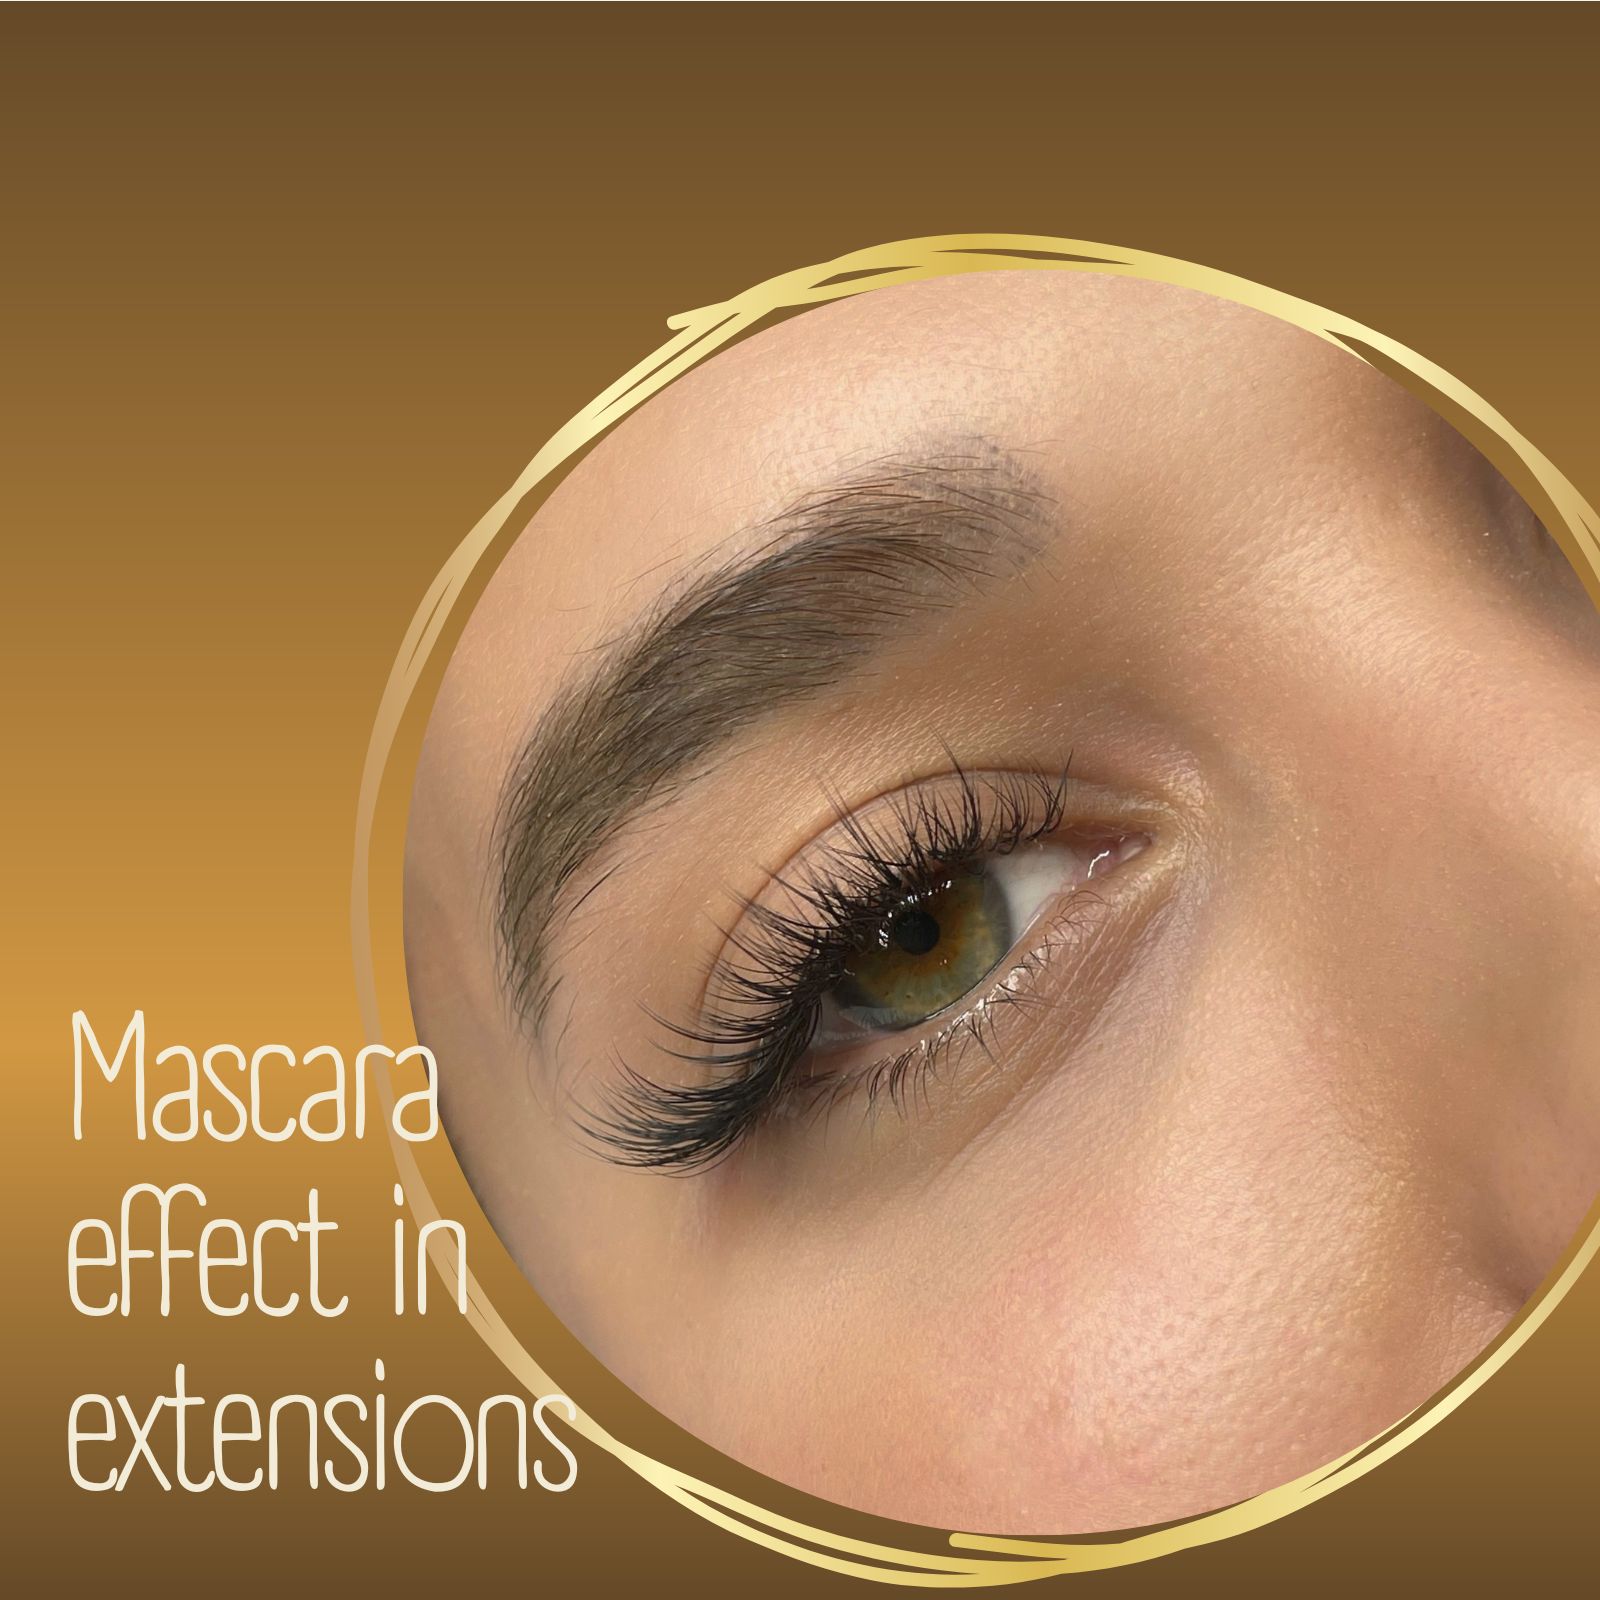 Mascara effect in extensions